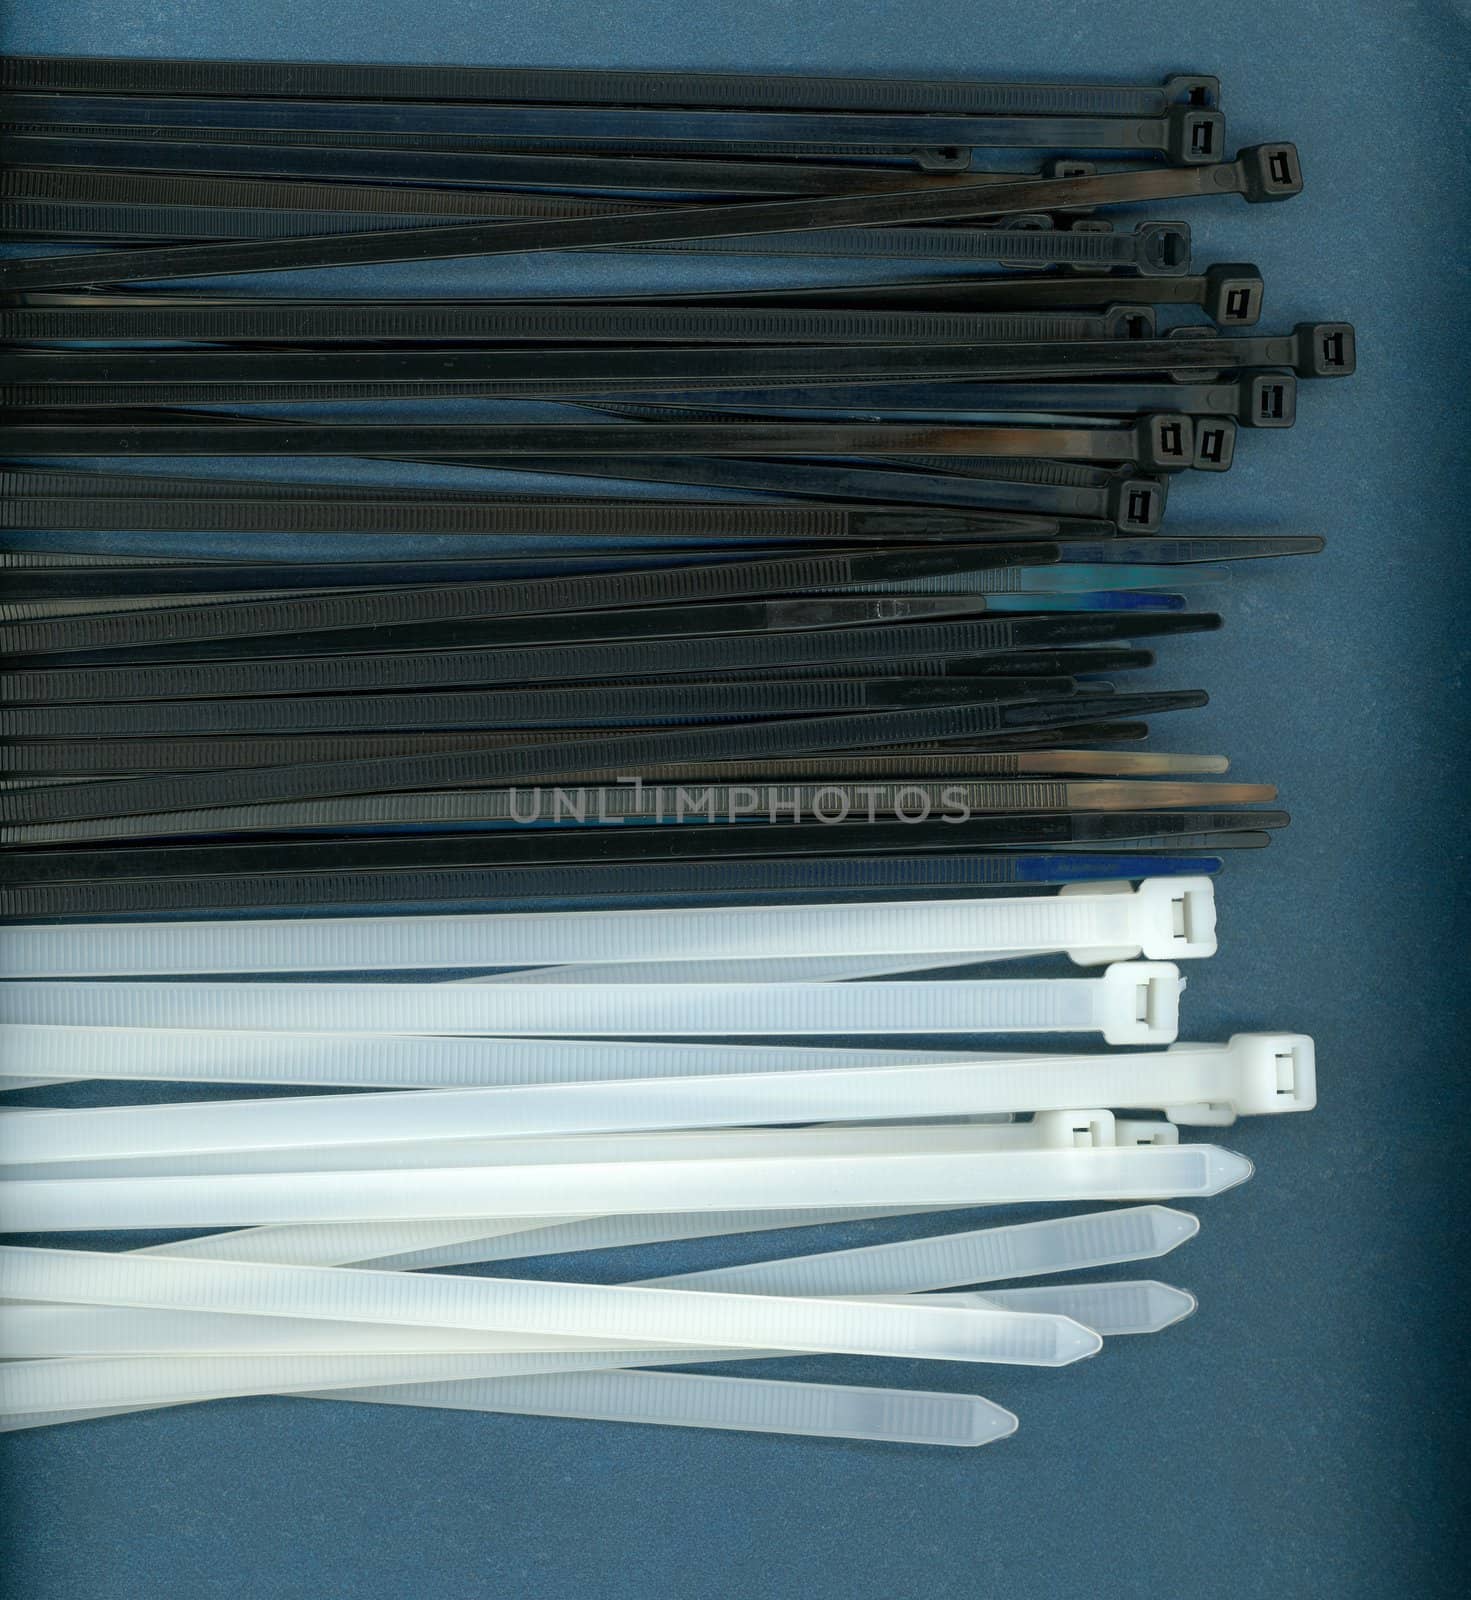 black and white electric cable ties (aka hose tie or zip tie)